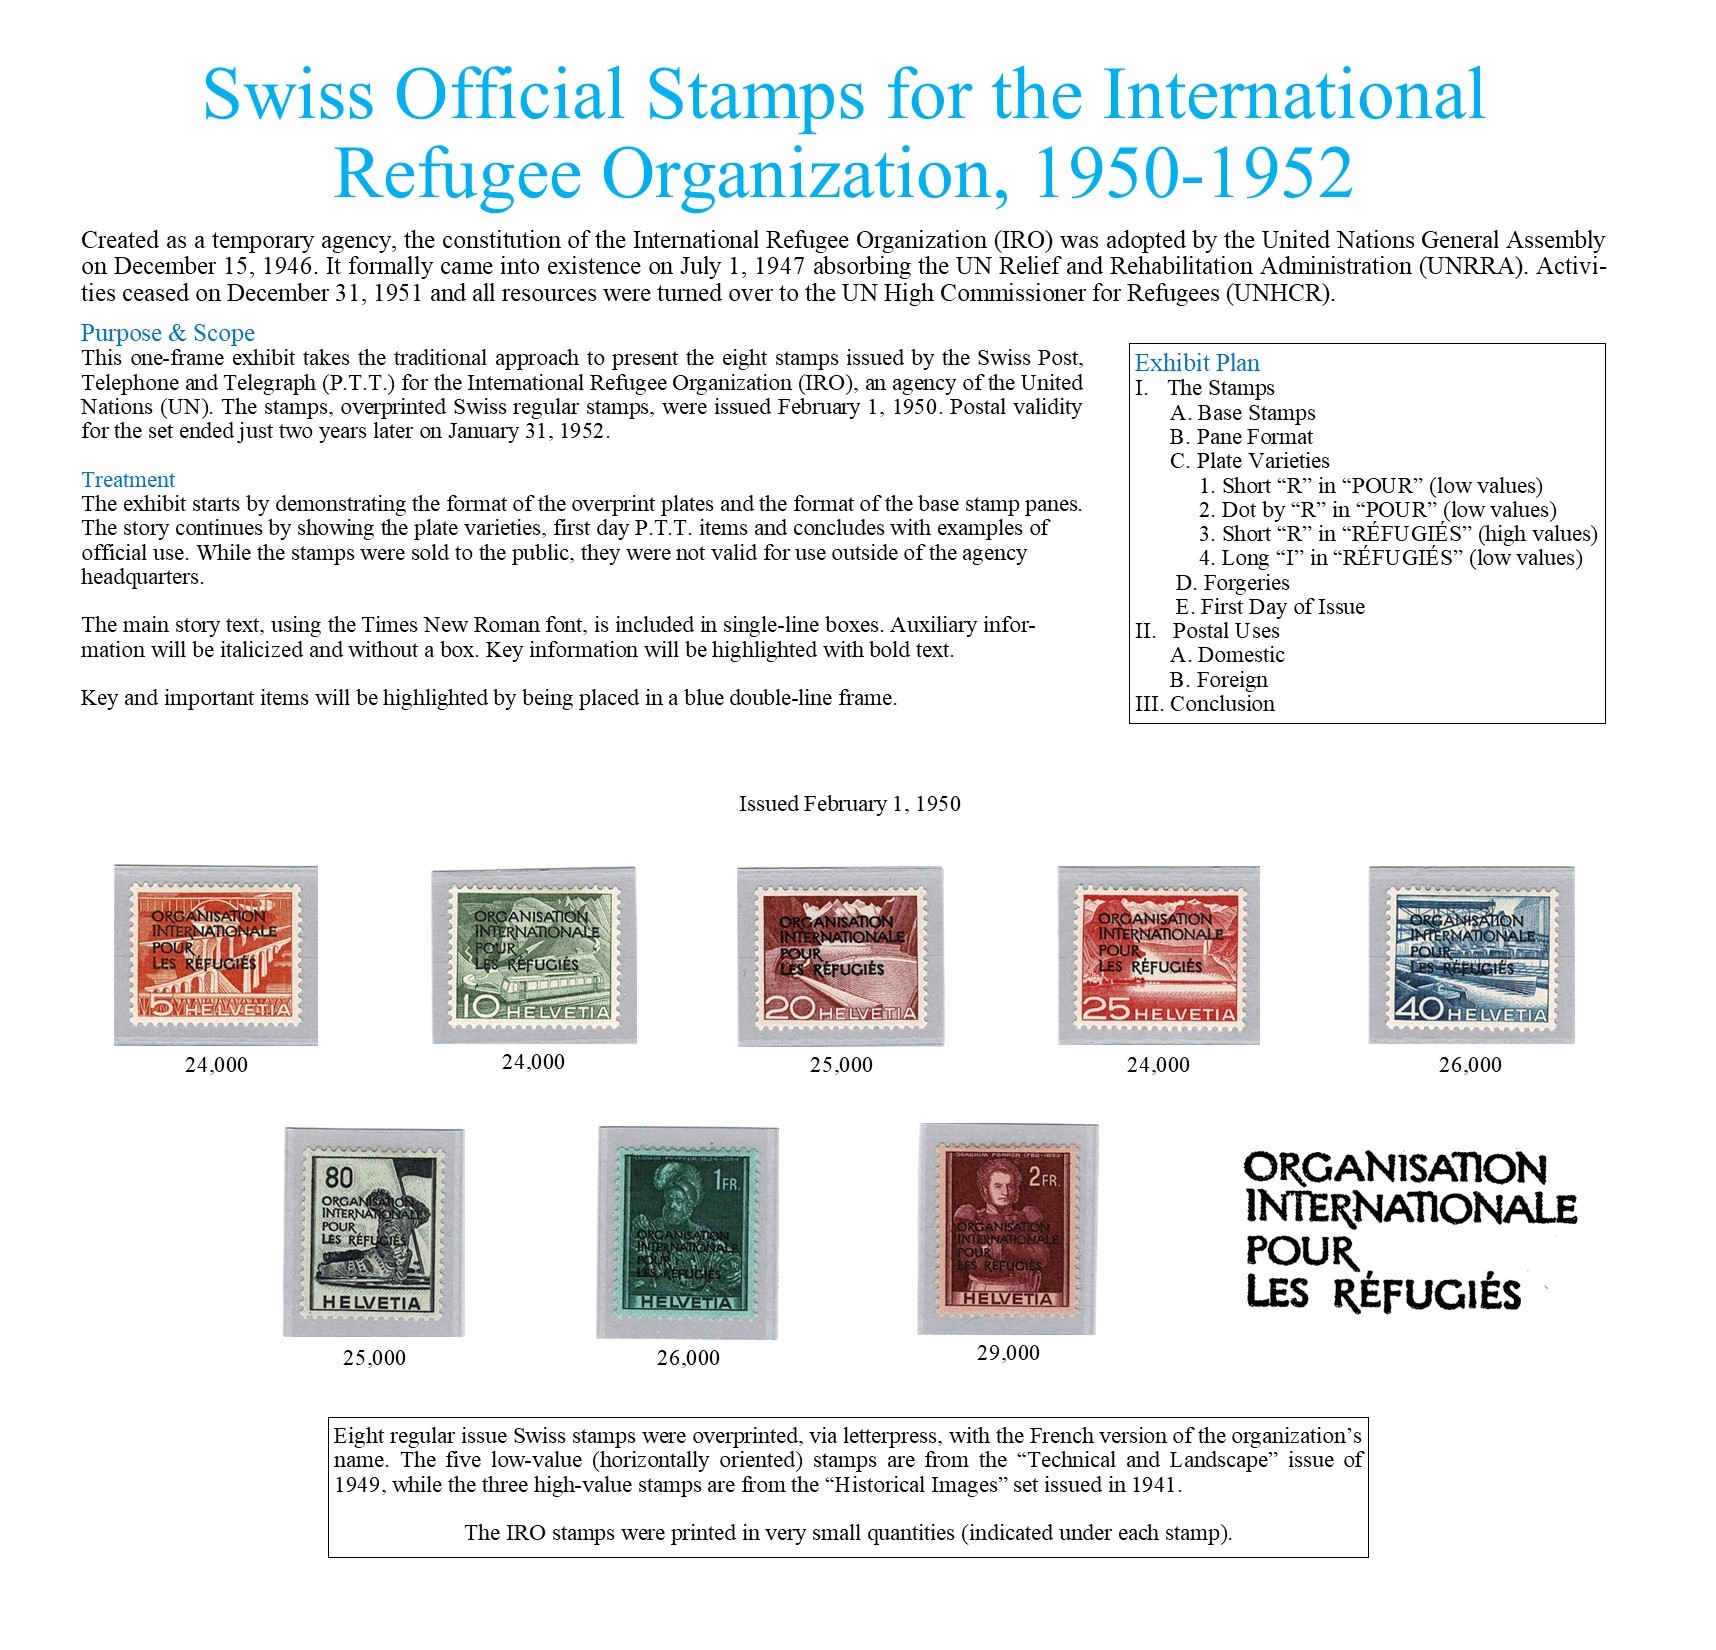 Swiss Official Stamps for the International Refugee Organization, 1950-1952